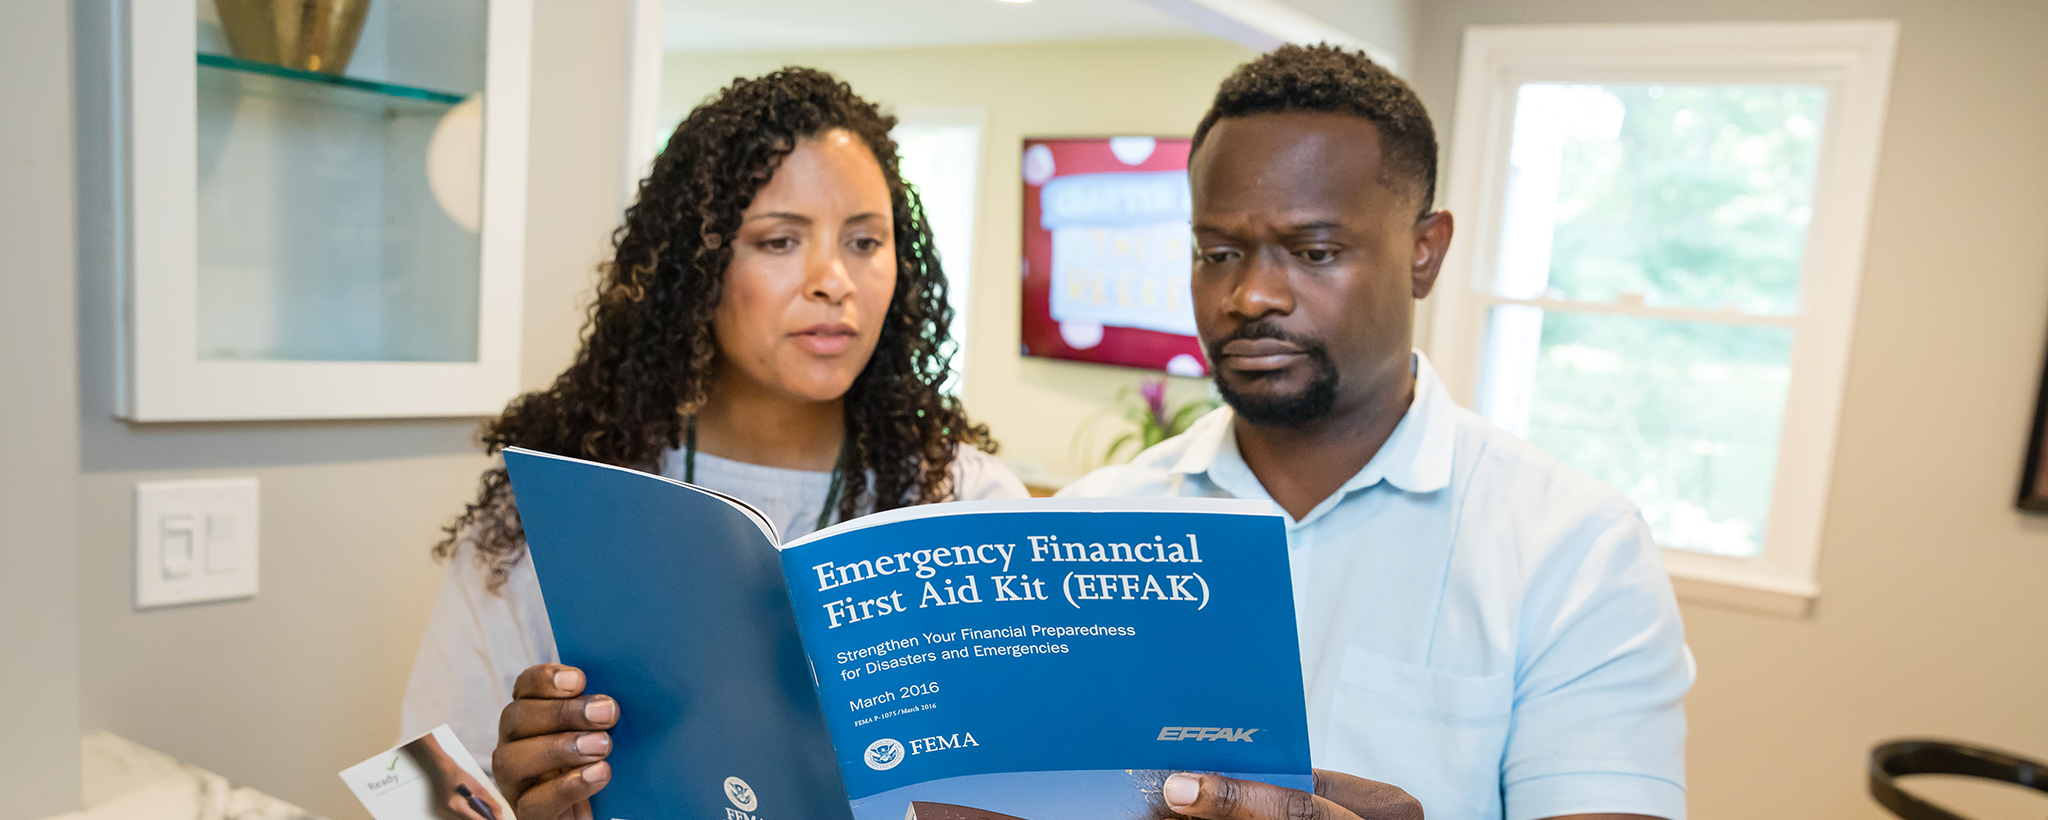 a couple looks at an Emergency Financial First Aid Kit